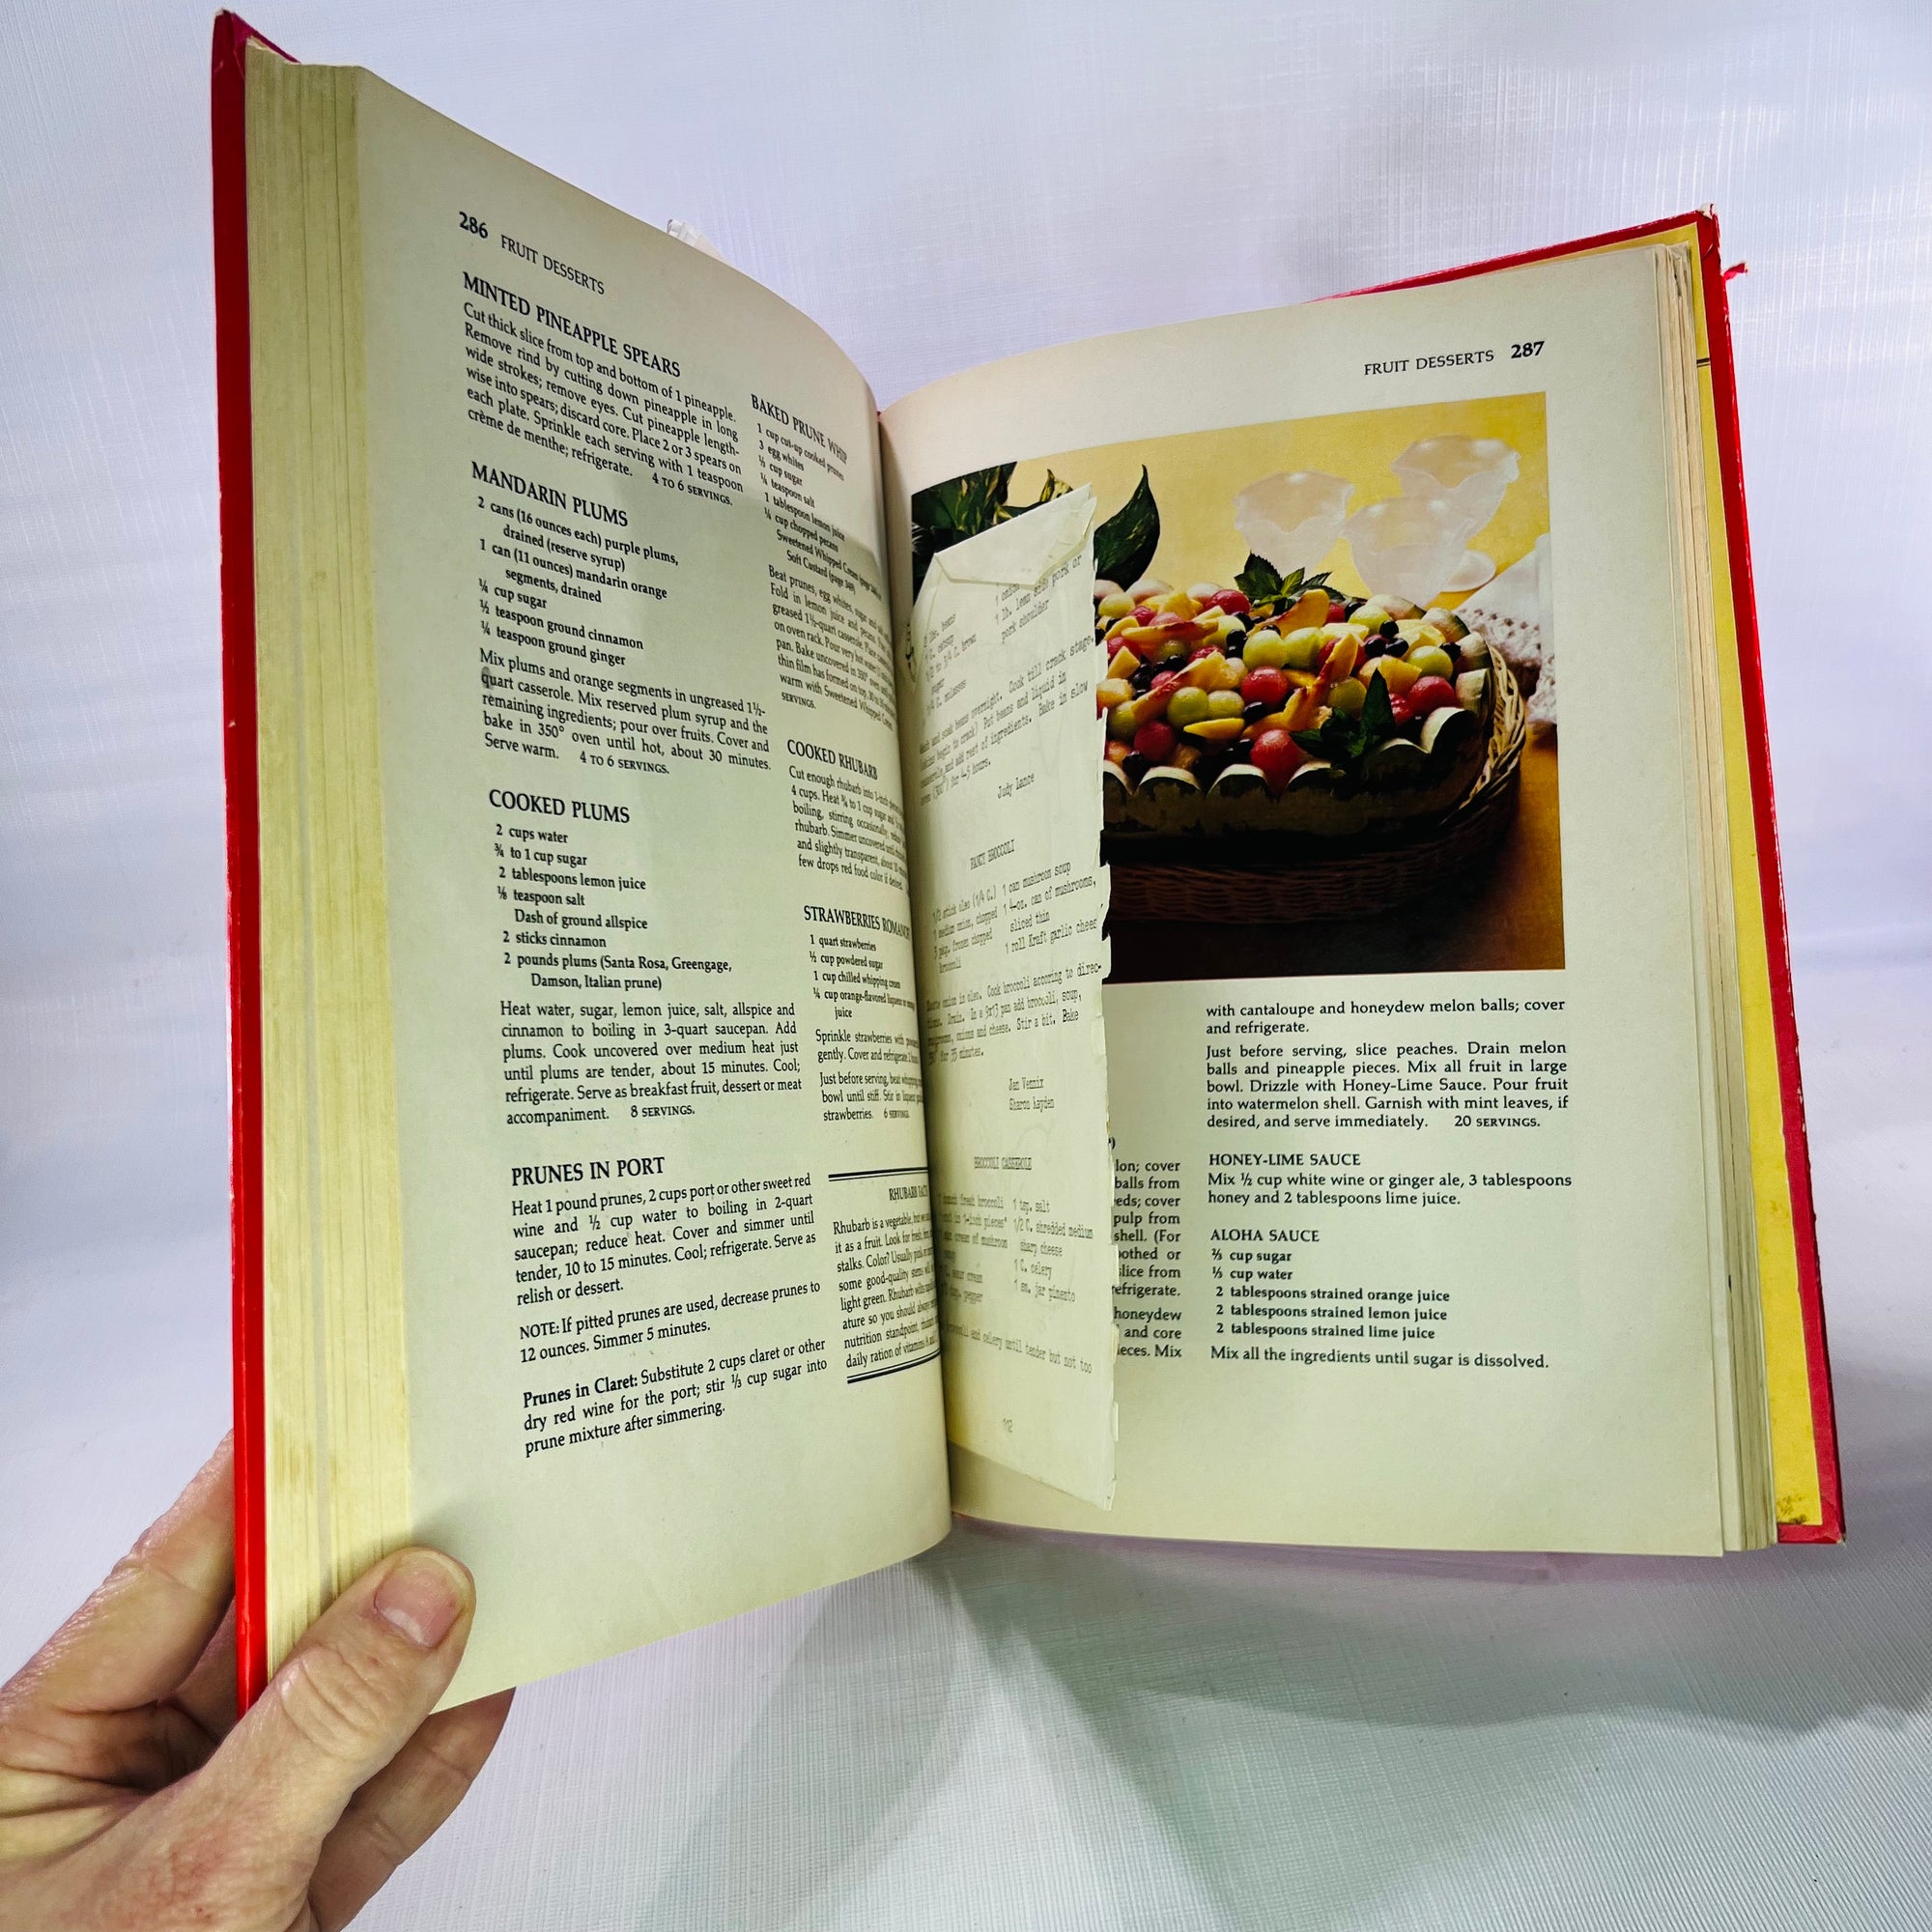 Betty Crocker's Cook Book New & Revised Edition Including Microwave Recipes by General Mills Inc 1982 Golden Press Vintage Cookbook Recipes